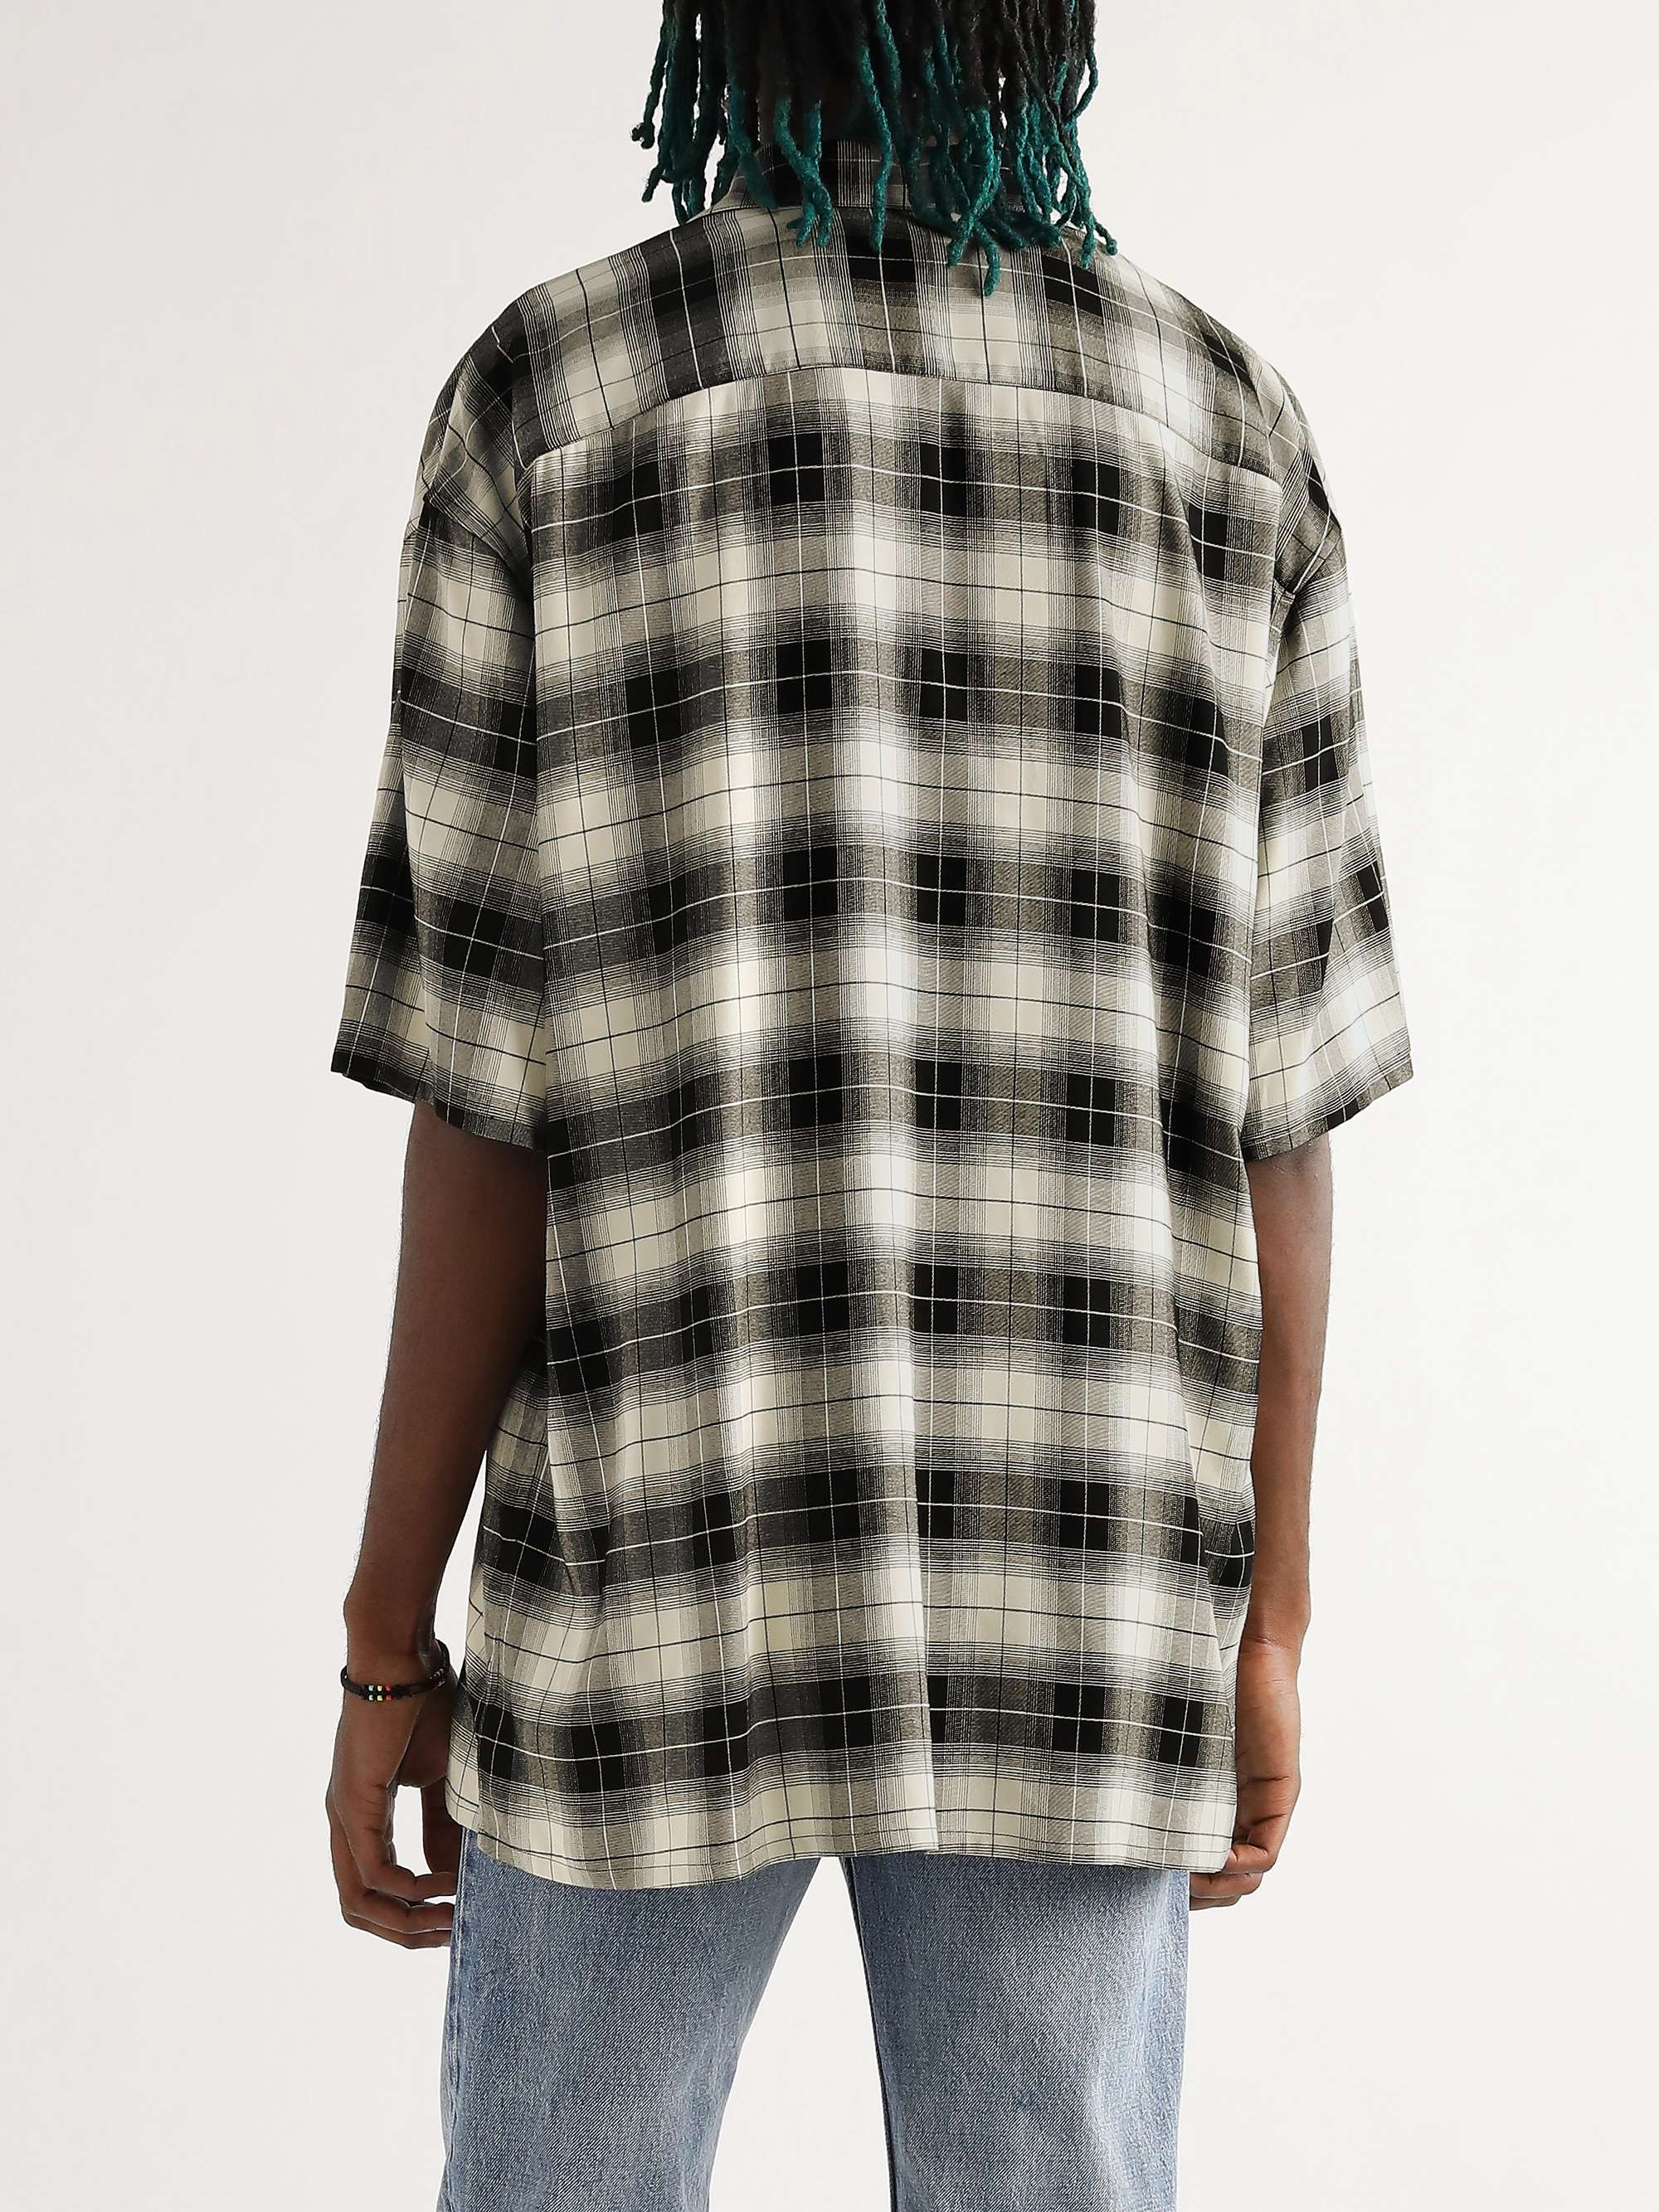 CELINE HOMME Camp-Collar Checked Woven Shirt